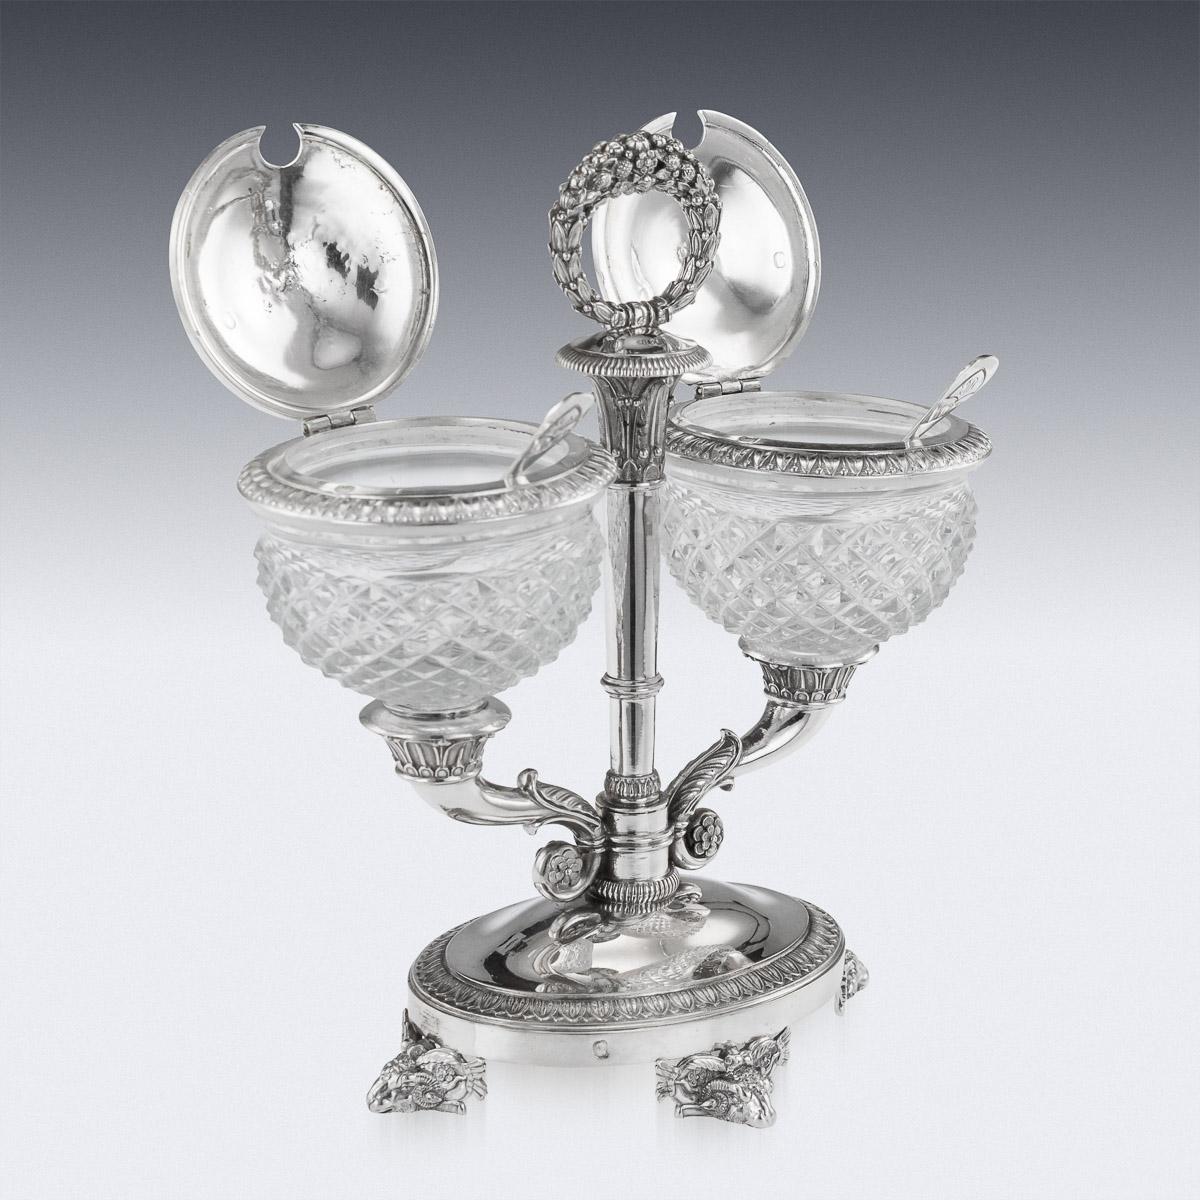 19th Century French Solid Silver & Glass Condiments Service, Paris, c.1830 5